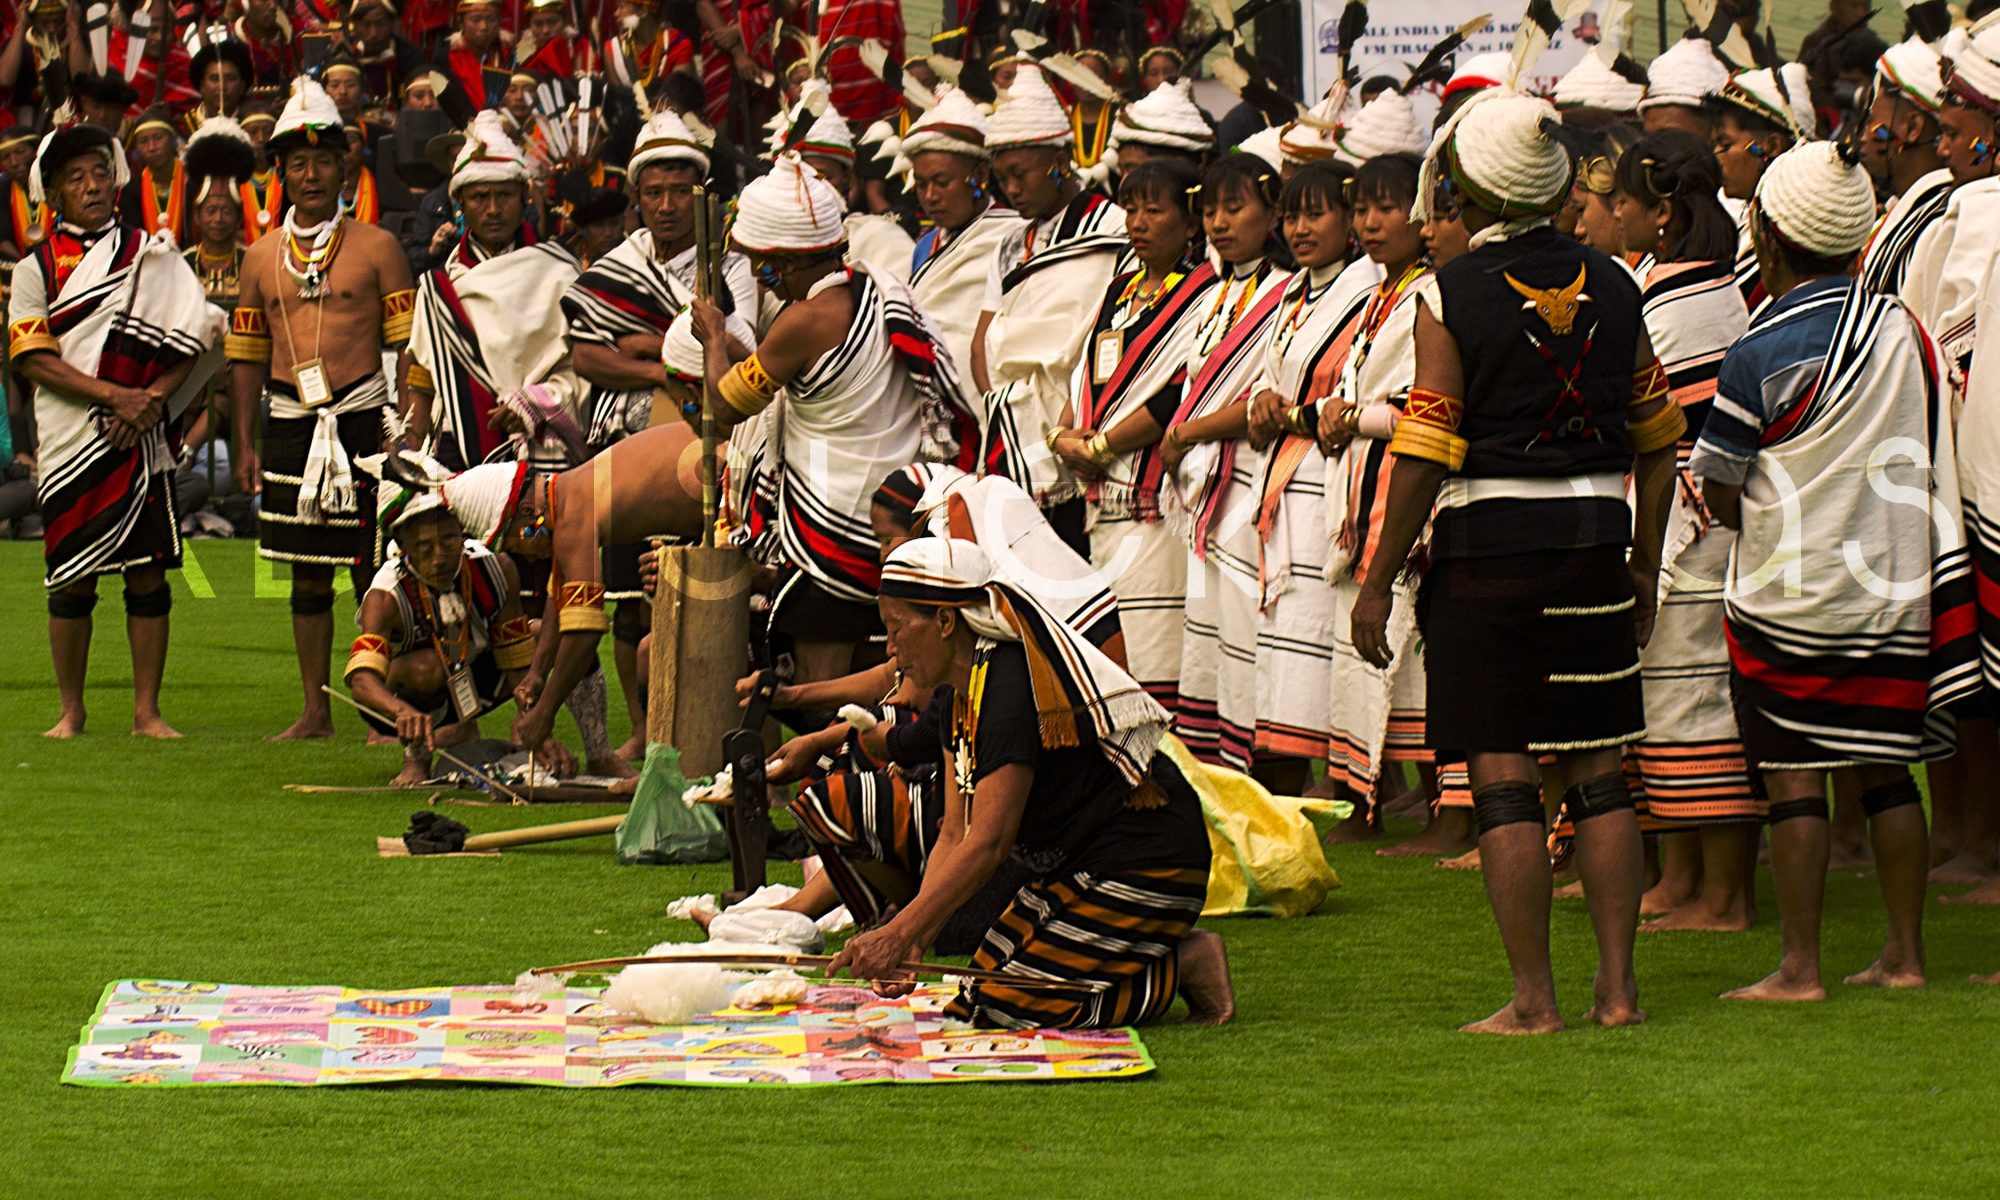 One of the most authentic features performance, sports, crafts and culture that are performed in the main arena